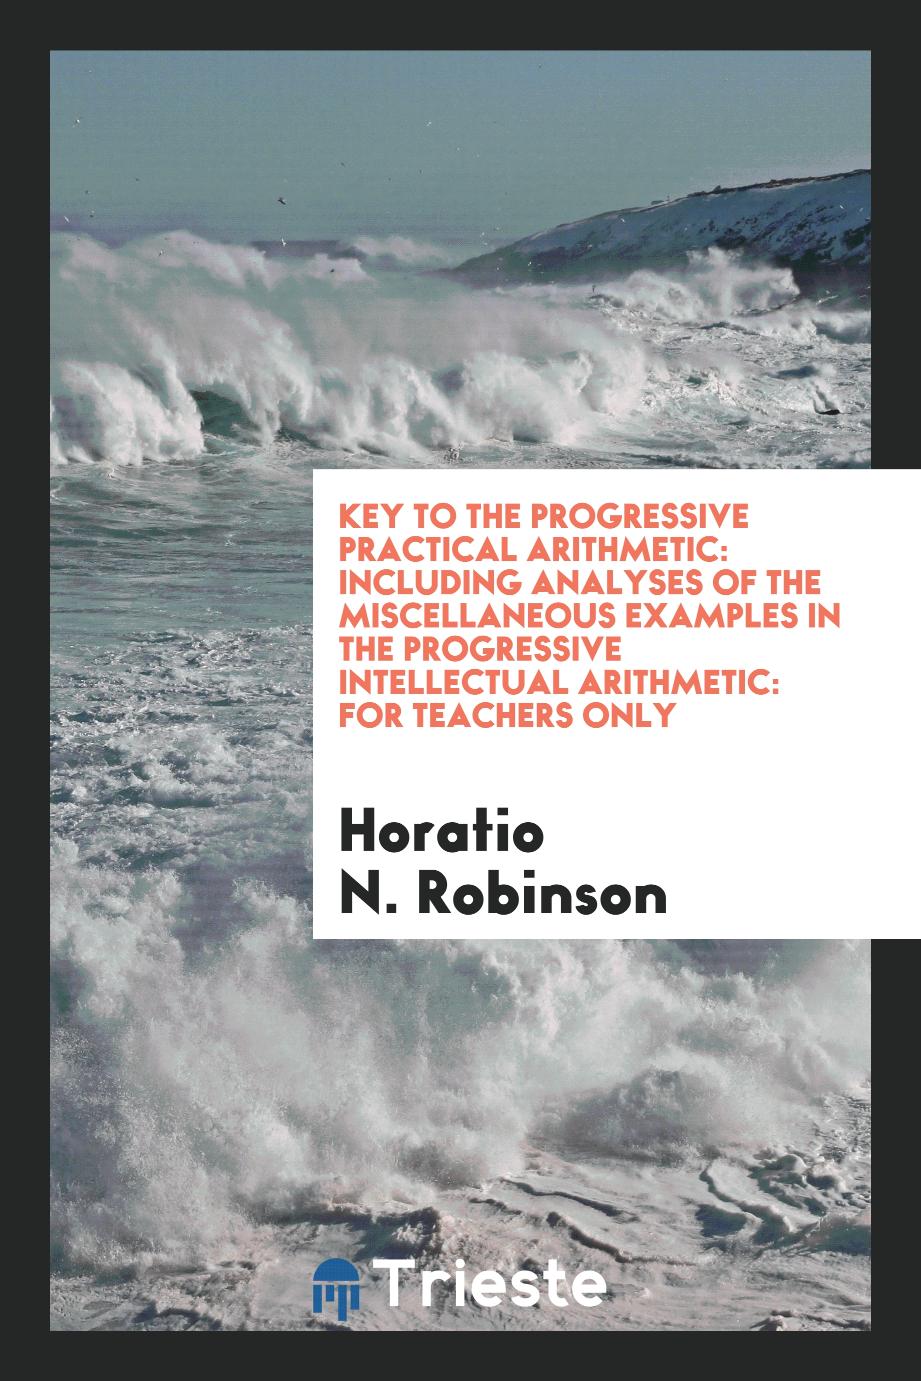 Key to the Progressive practical arithmetic: including analyses of the miscellaneous examples in the Progressive intellectual arithmetic: for teachers only